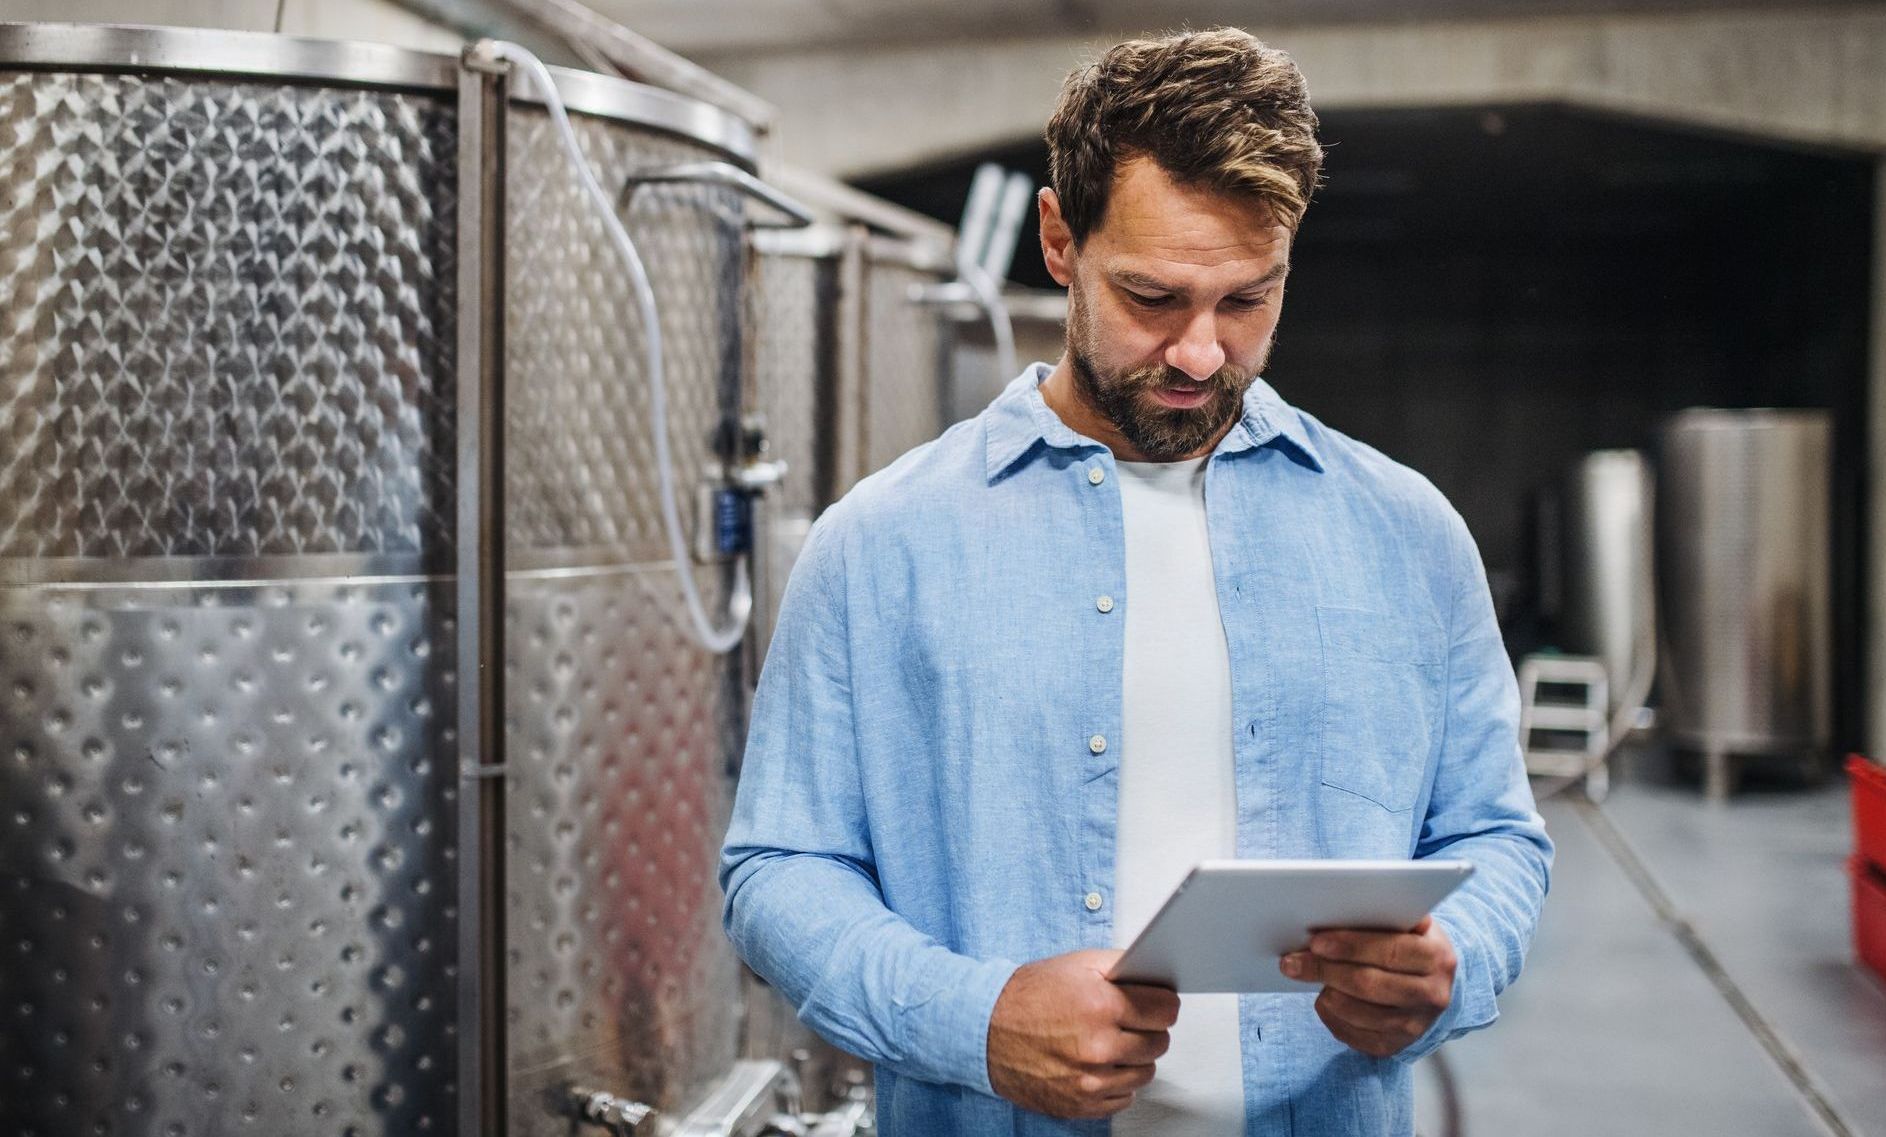 Winery employee working on tablet